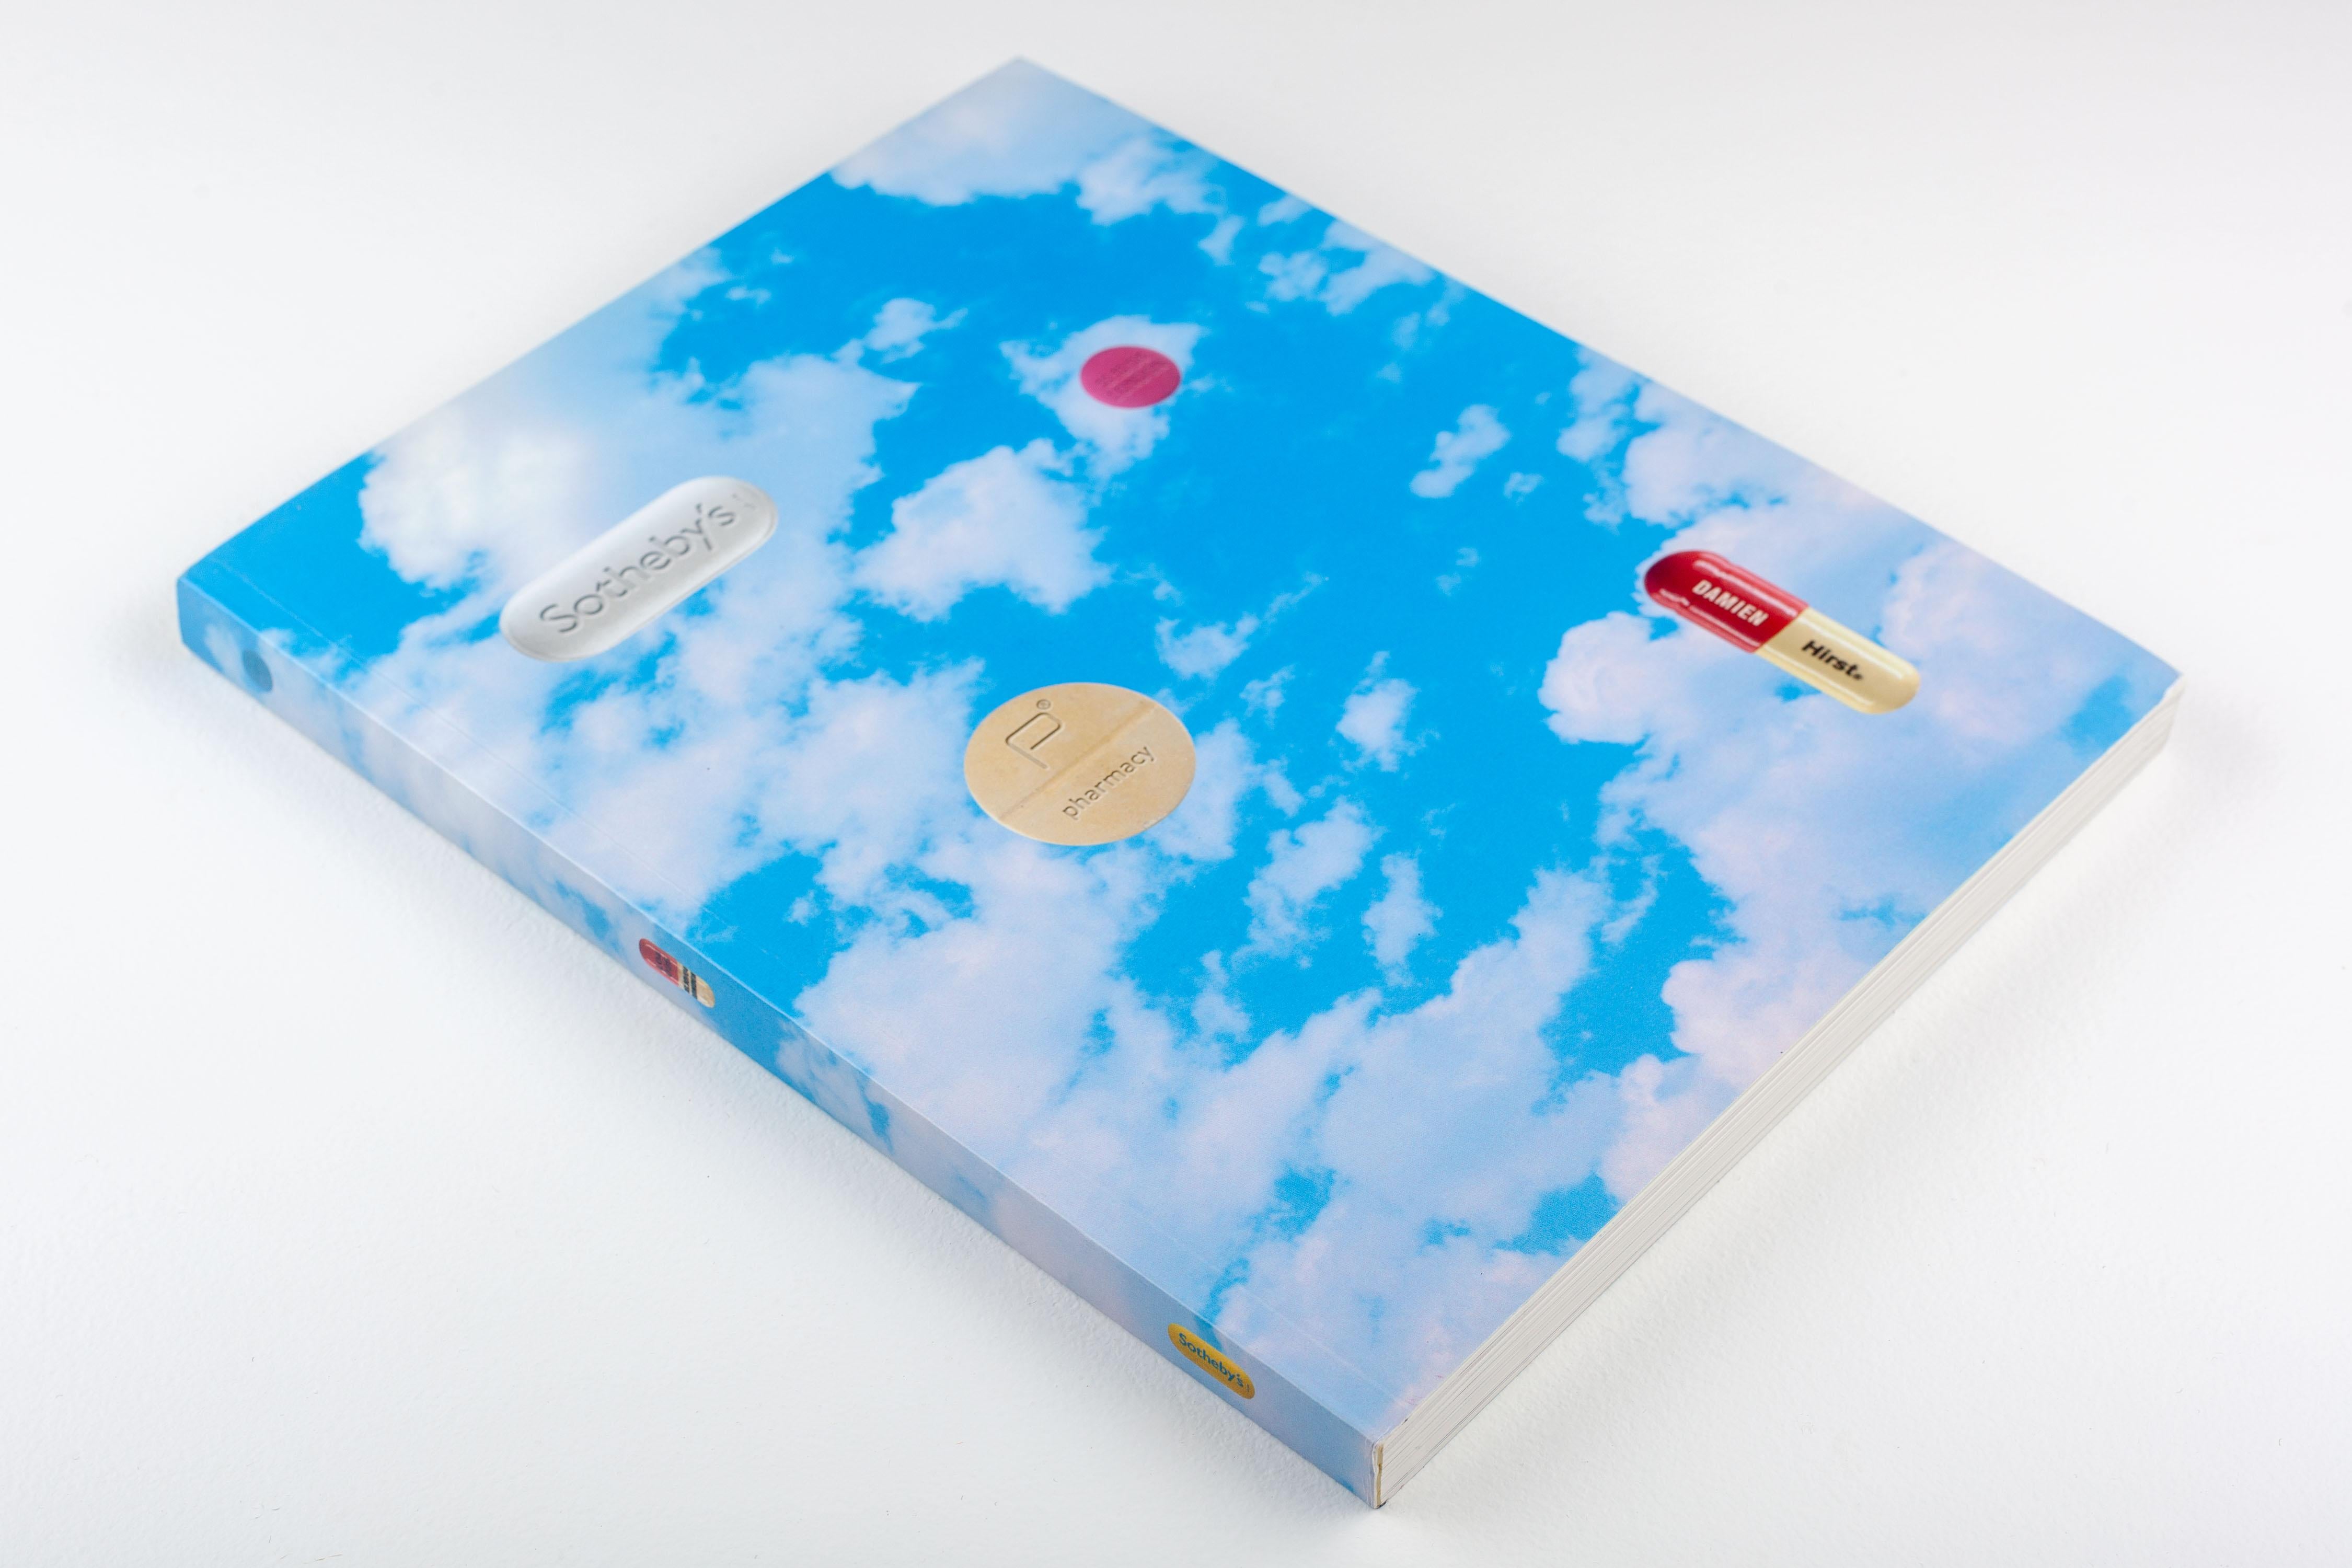 The book / auction catalog for Damien Hirst's restaurant, Pharmacy. The catalog is for the 2004 Sotheby's auction that featured the contents of the Pharmacy restaurant, which operated from 1997 to 2003 in the UK. Damien Hirst ully designed the